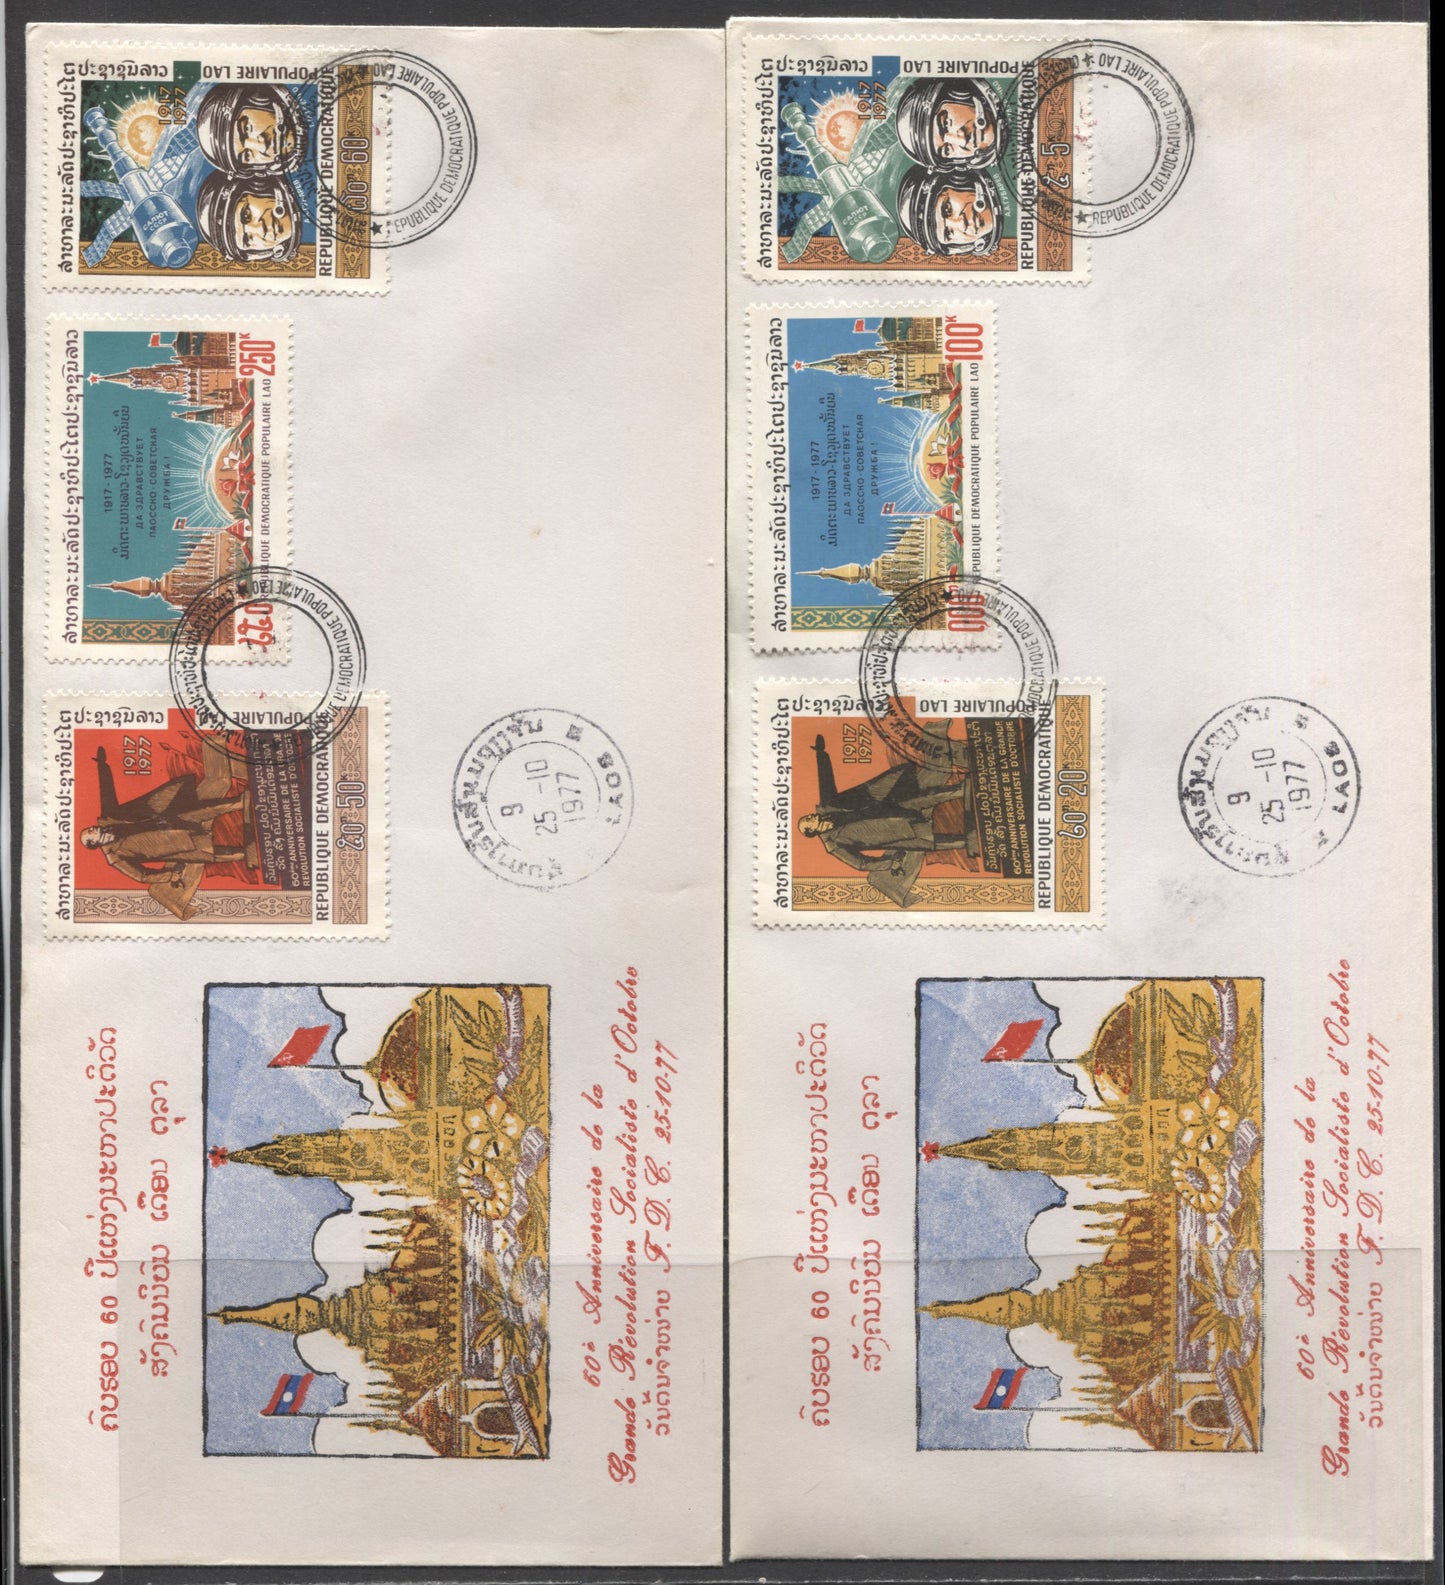 Lot 60 Laos SC#287-292 1977 October Revolution Issue, A Very Fine Range Of Perf & Imperf Singles On FDC's, 2017 Scott Cat. $18.85 USD, Click on Listing to See ALL Pictures